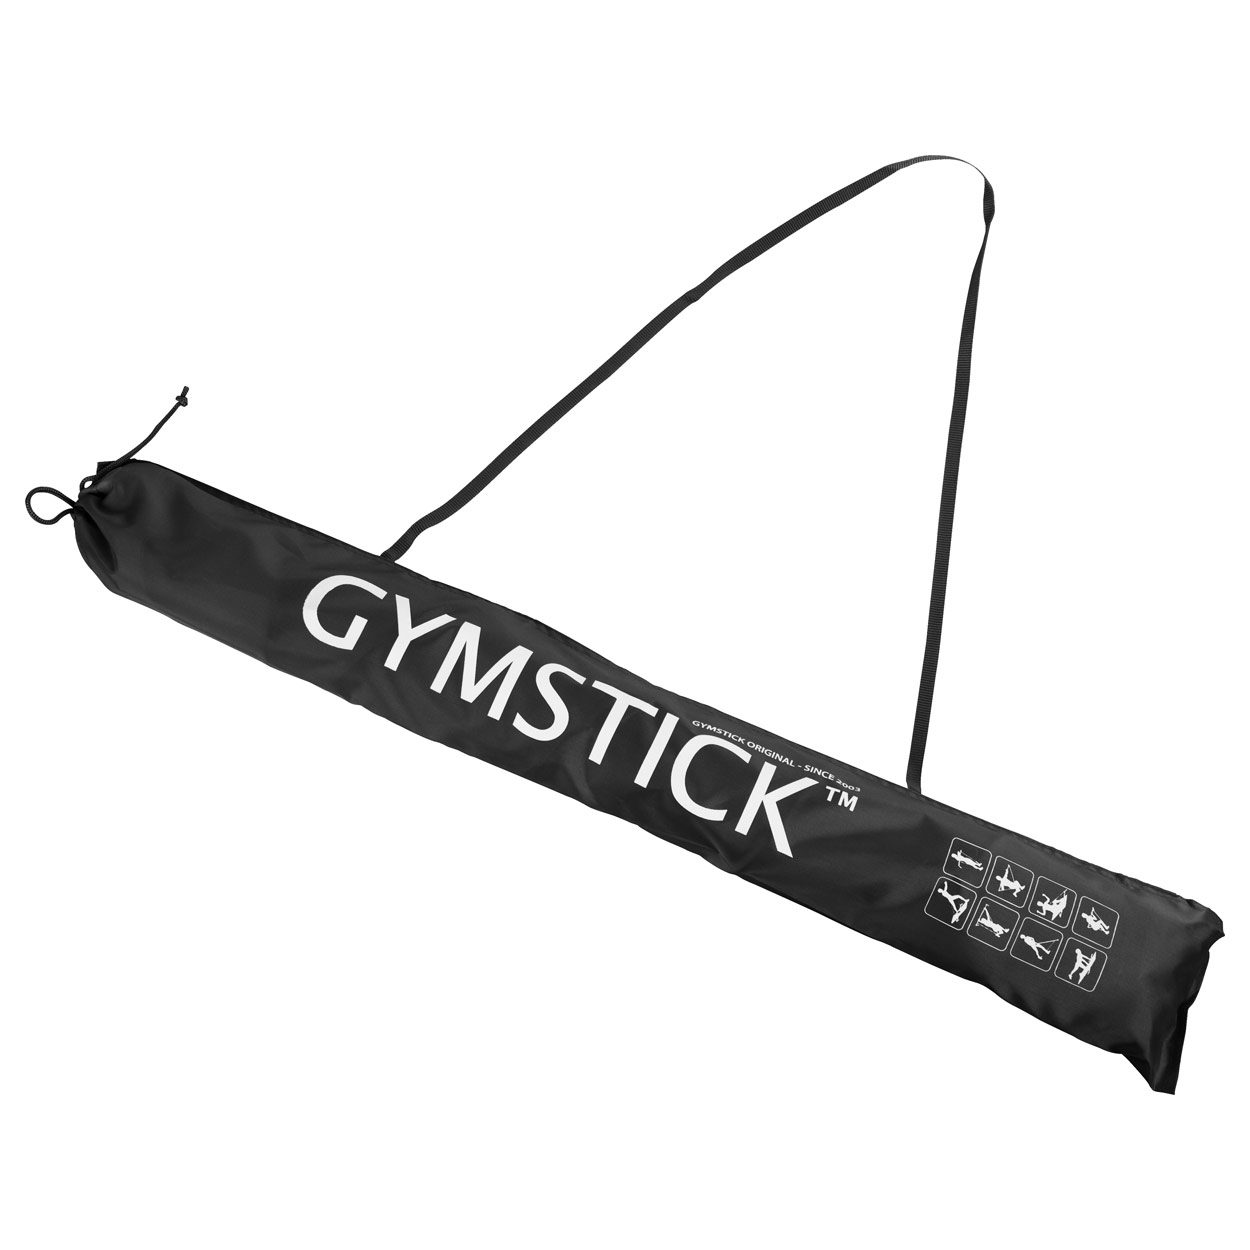 Gymstick incl. carrying bag, strong, black buy online | Sport-Tec